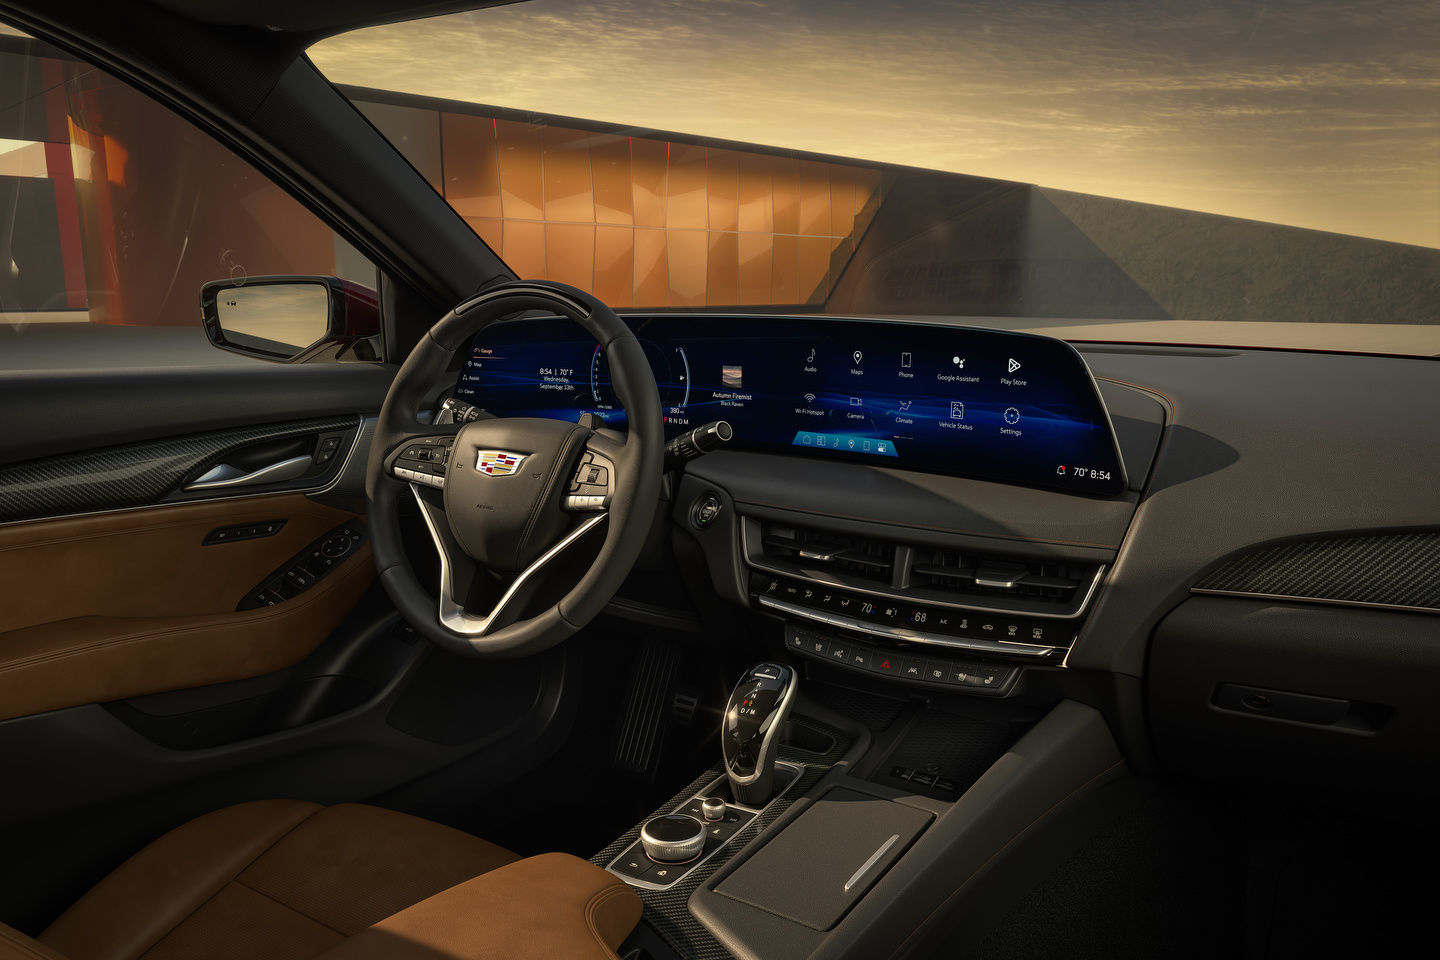 Cadillac Features That Make Winter Driving a Breeze